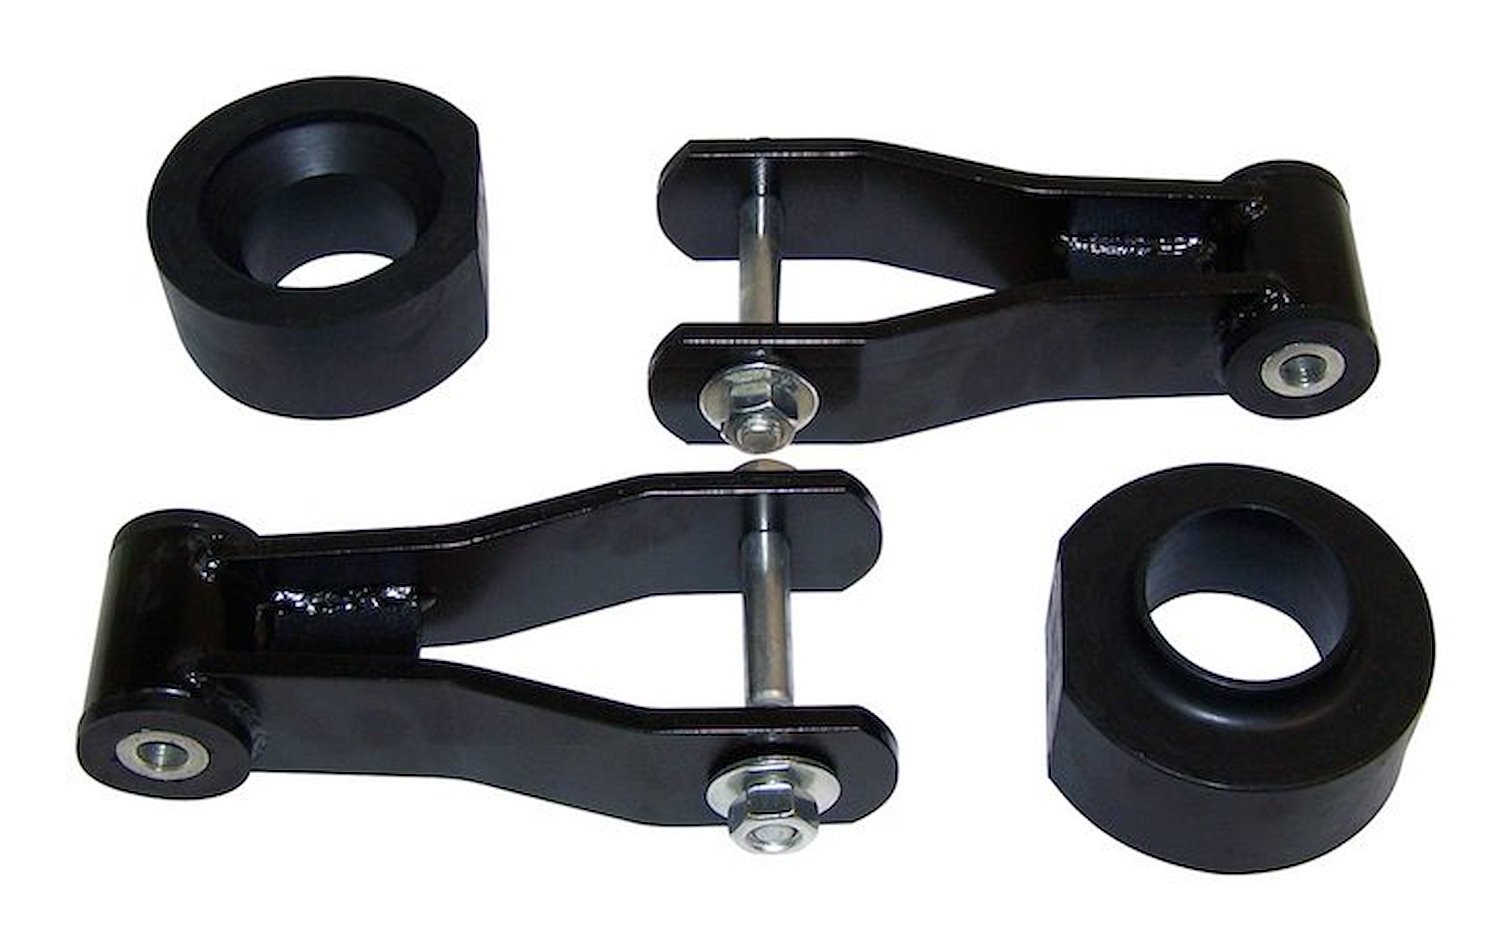 RT21046 1-3/4" Lift Polyurethane Kit for 1984-2001 Jeep XJ Cherokee; Can Use 30" Tires